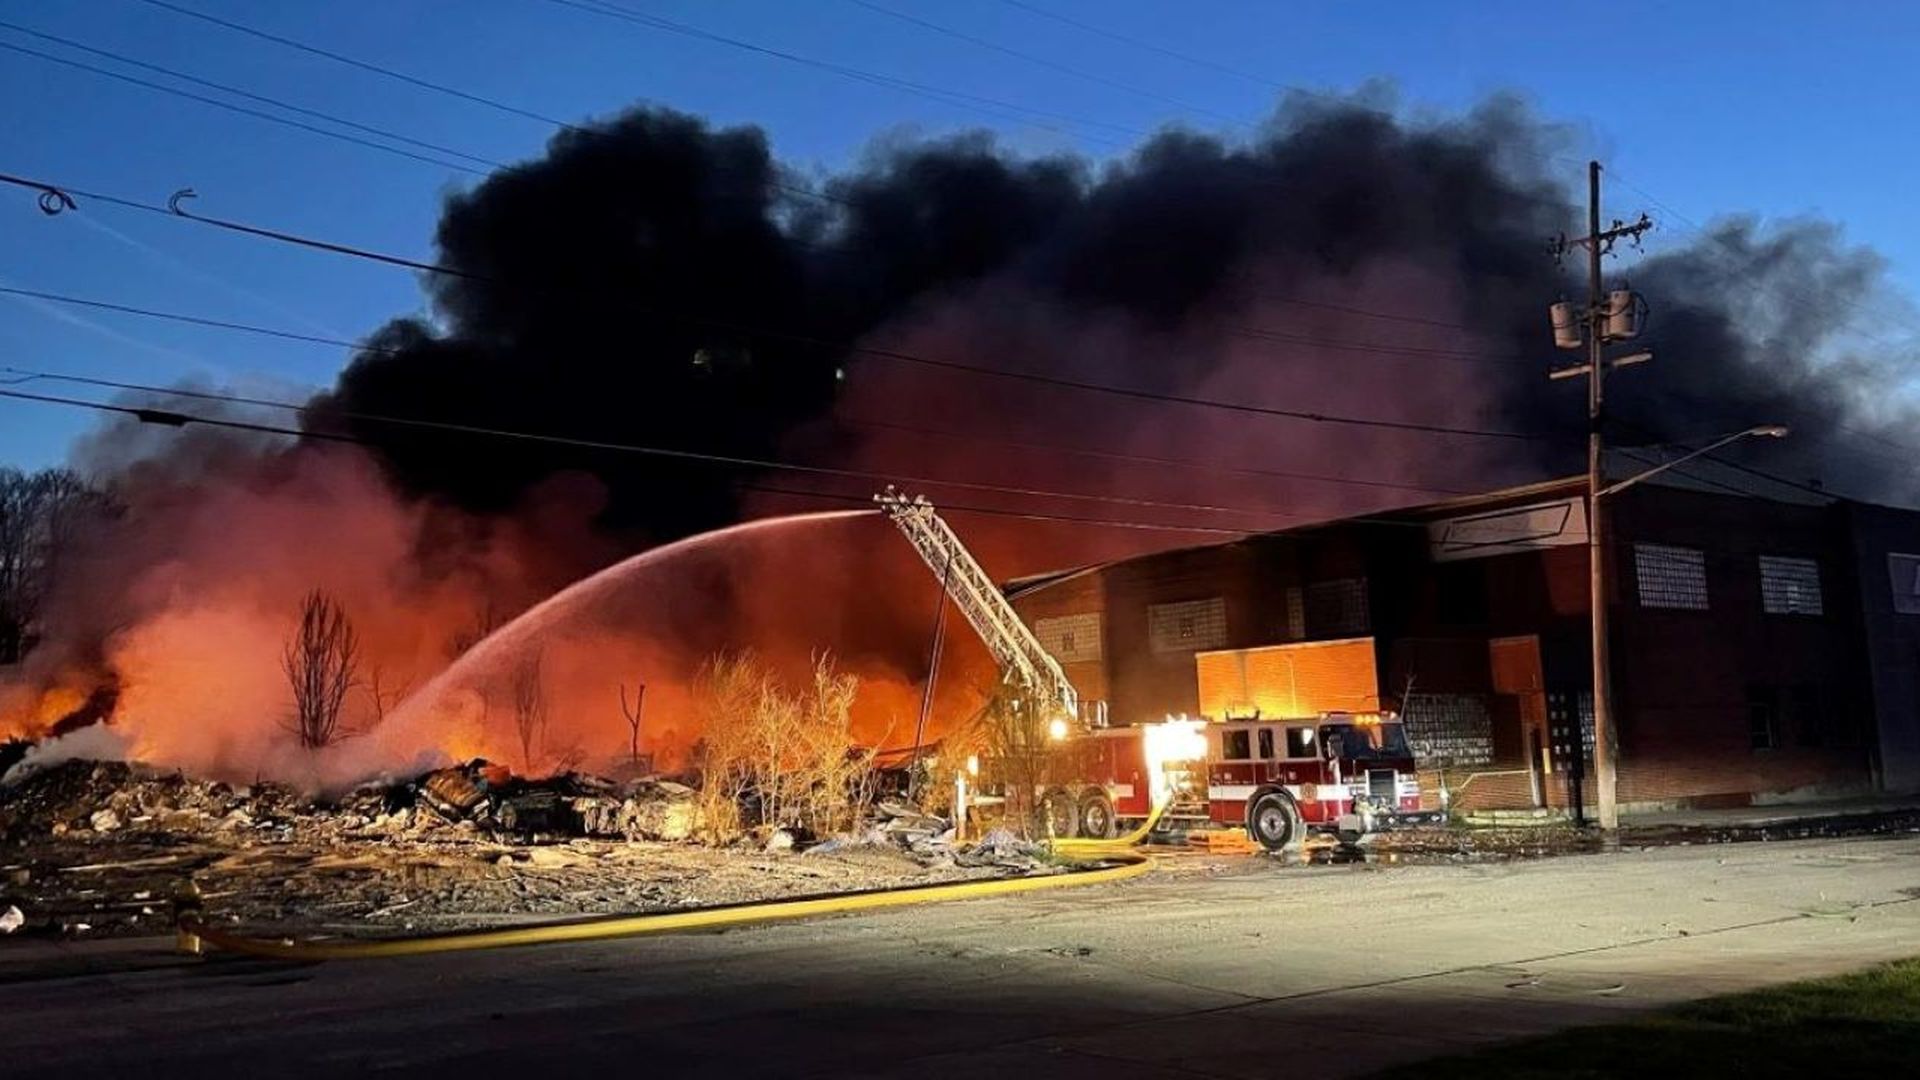 The industrial fire in Richmond, Indiana, on April 11.